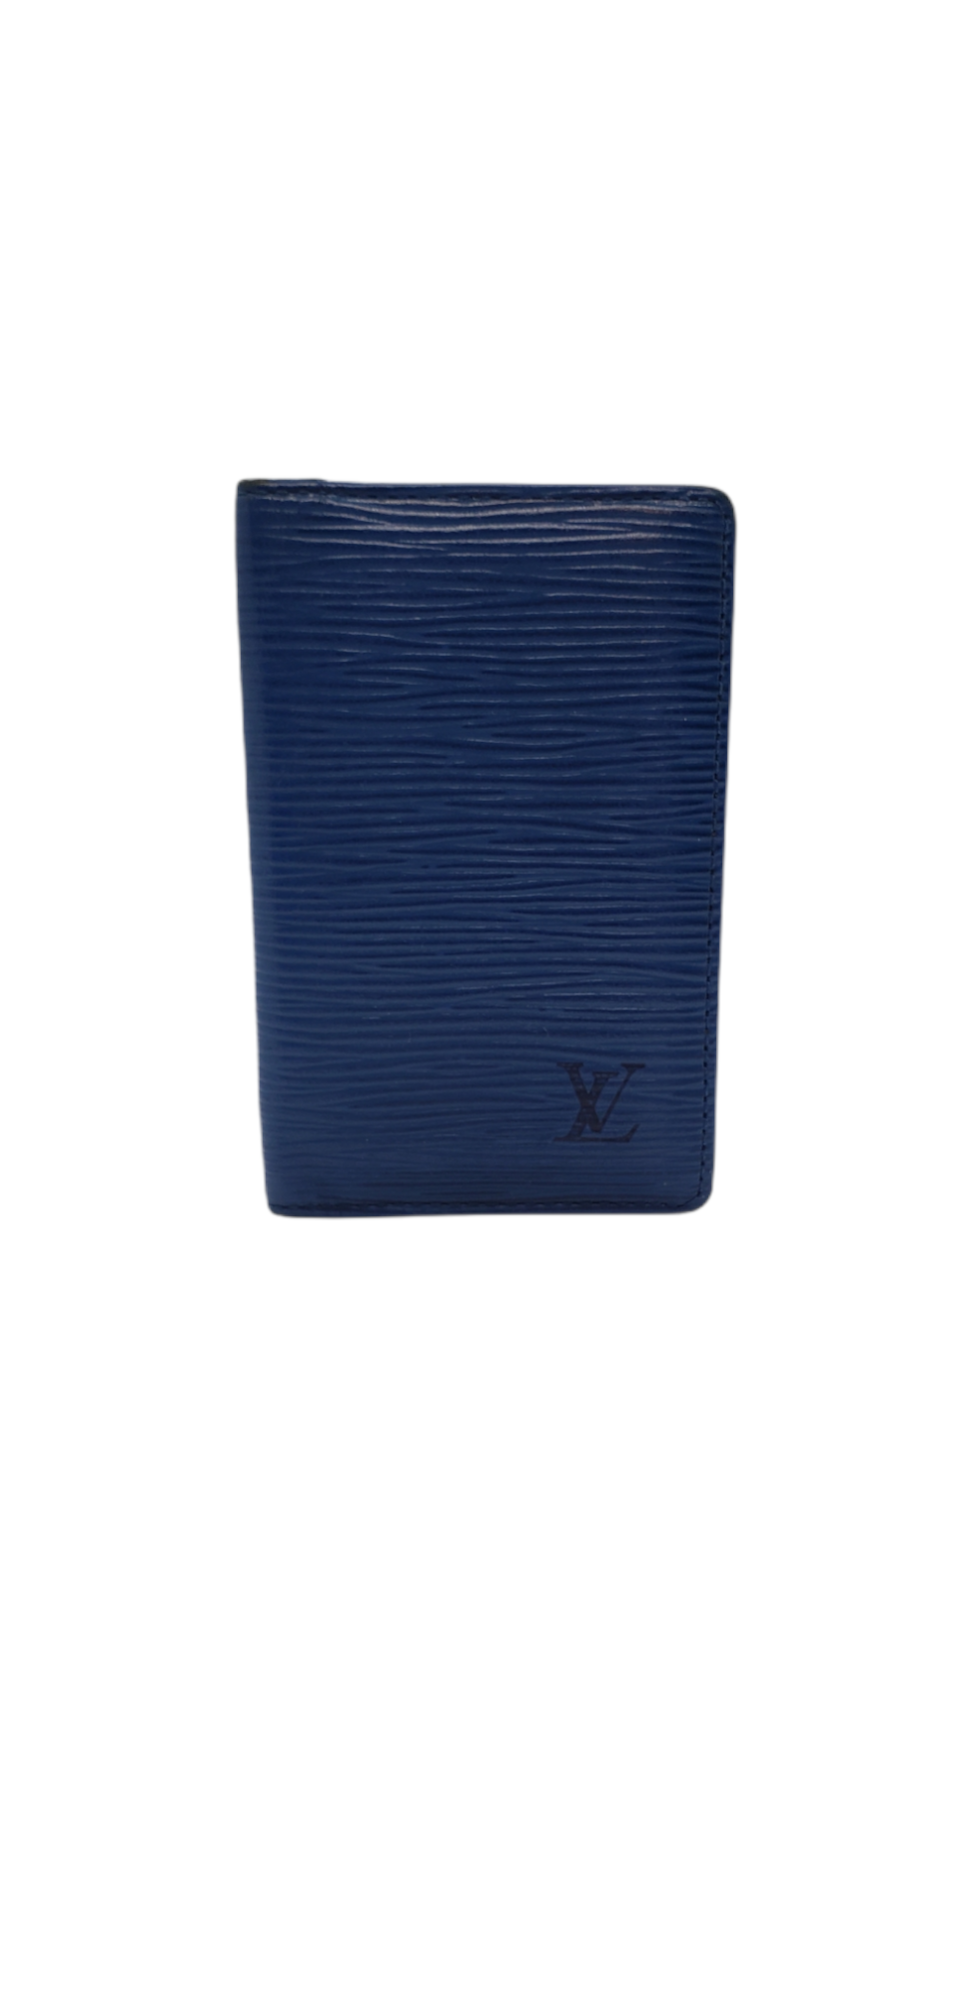 Louis Vuitton

Card Holder Wallet

Epi Leather Blue

1993

Condition:Fair. Outside only wear on corners. inside pockets peeling